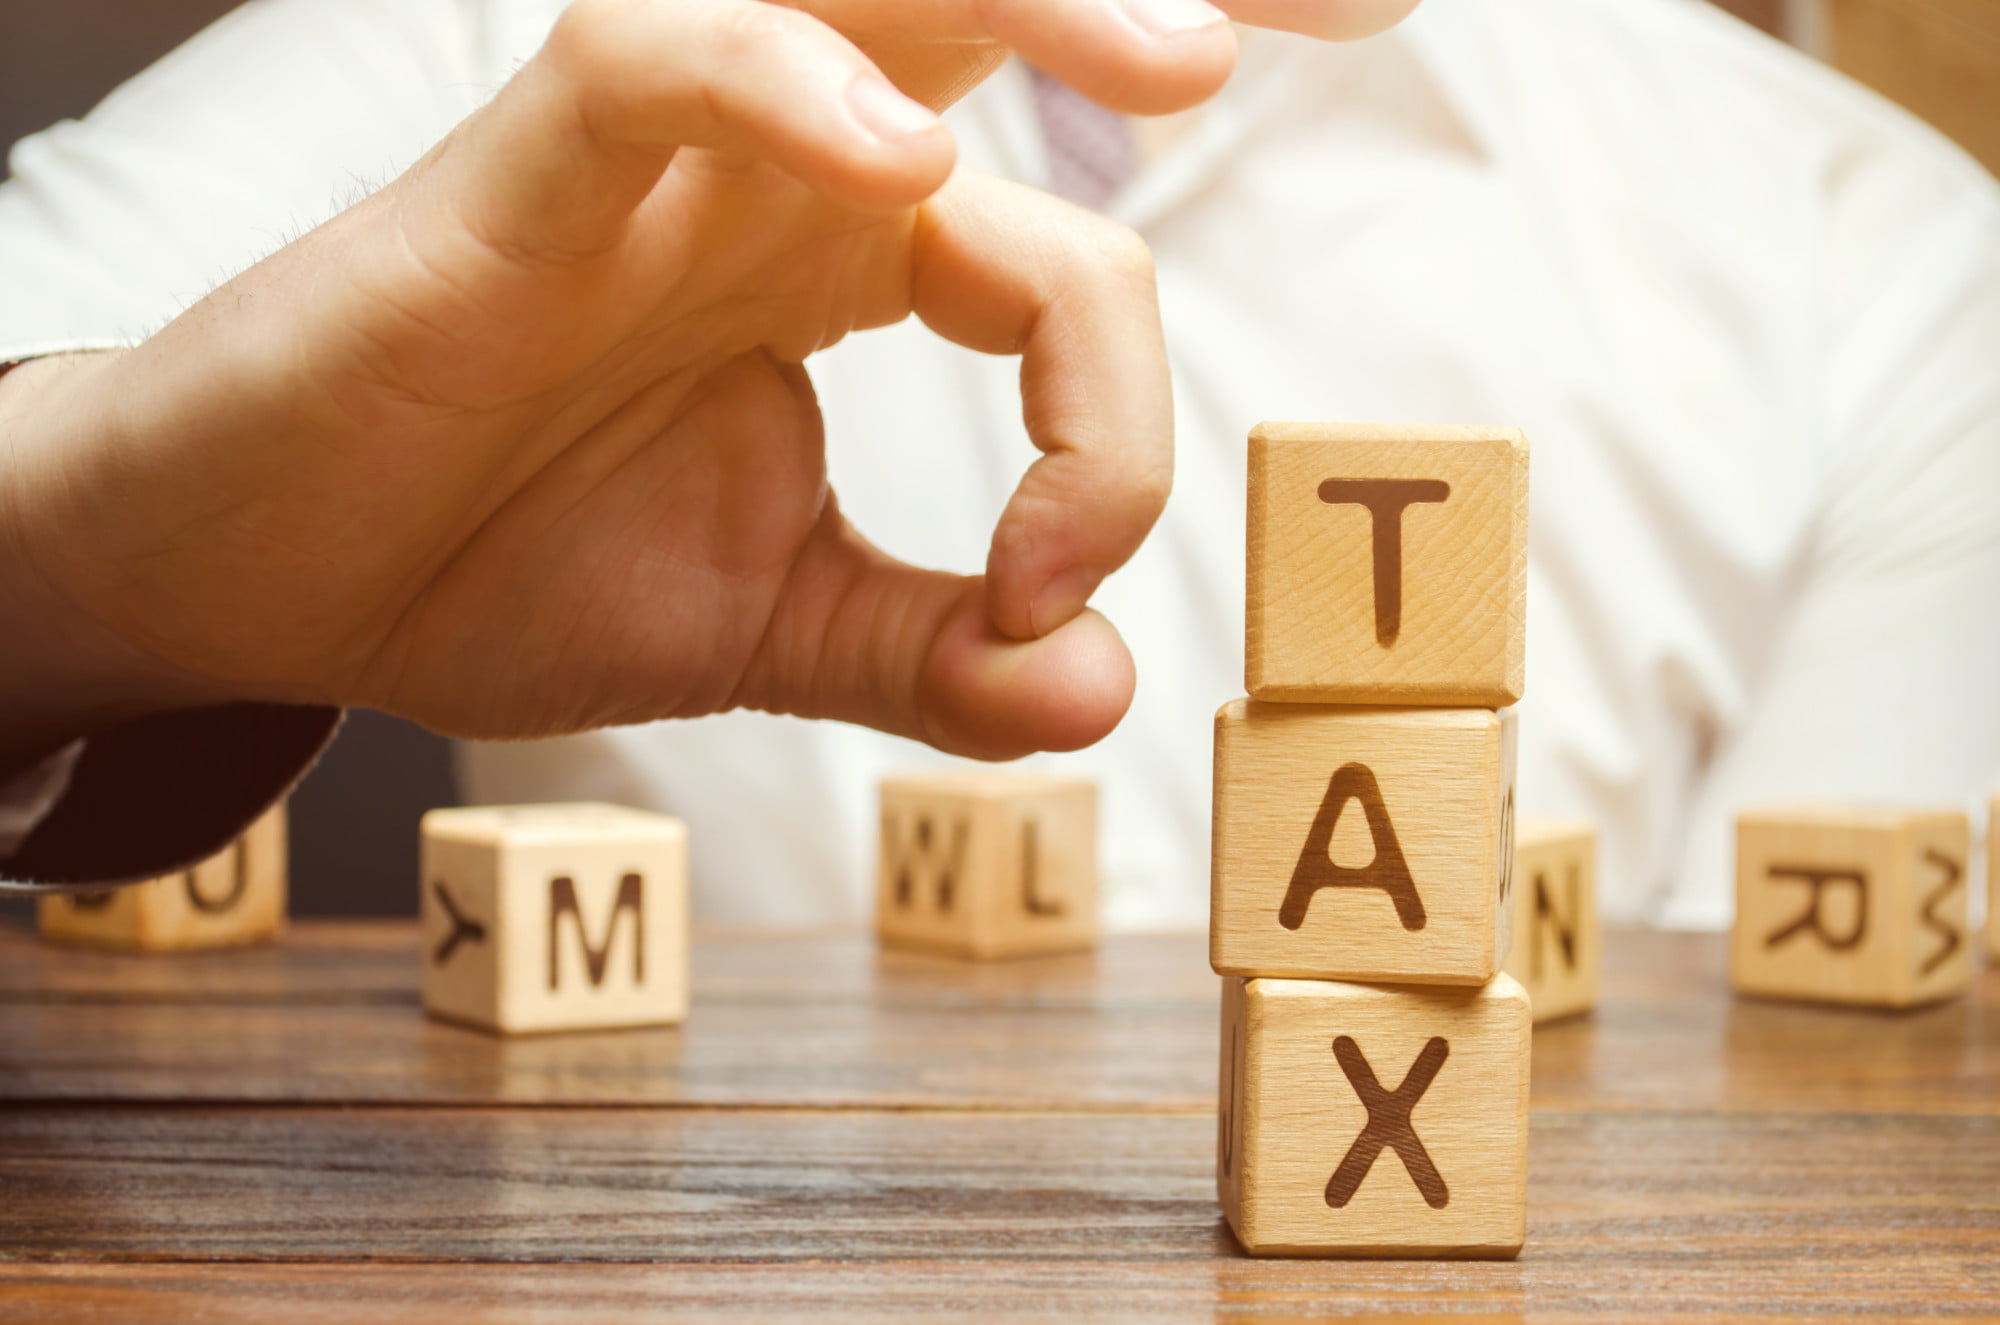 Are you wondering how to properly tax plan for your future? Click here for five factors to consider when tax planning that are sure to help you.